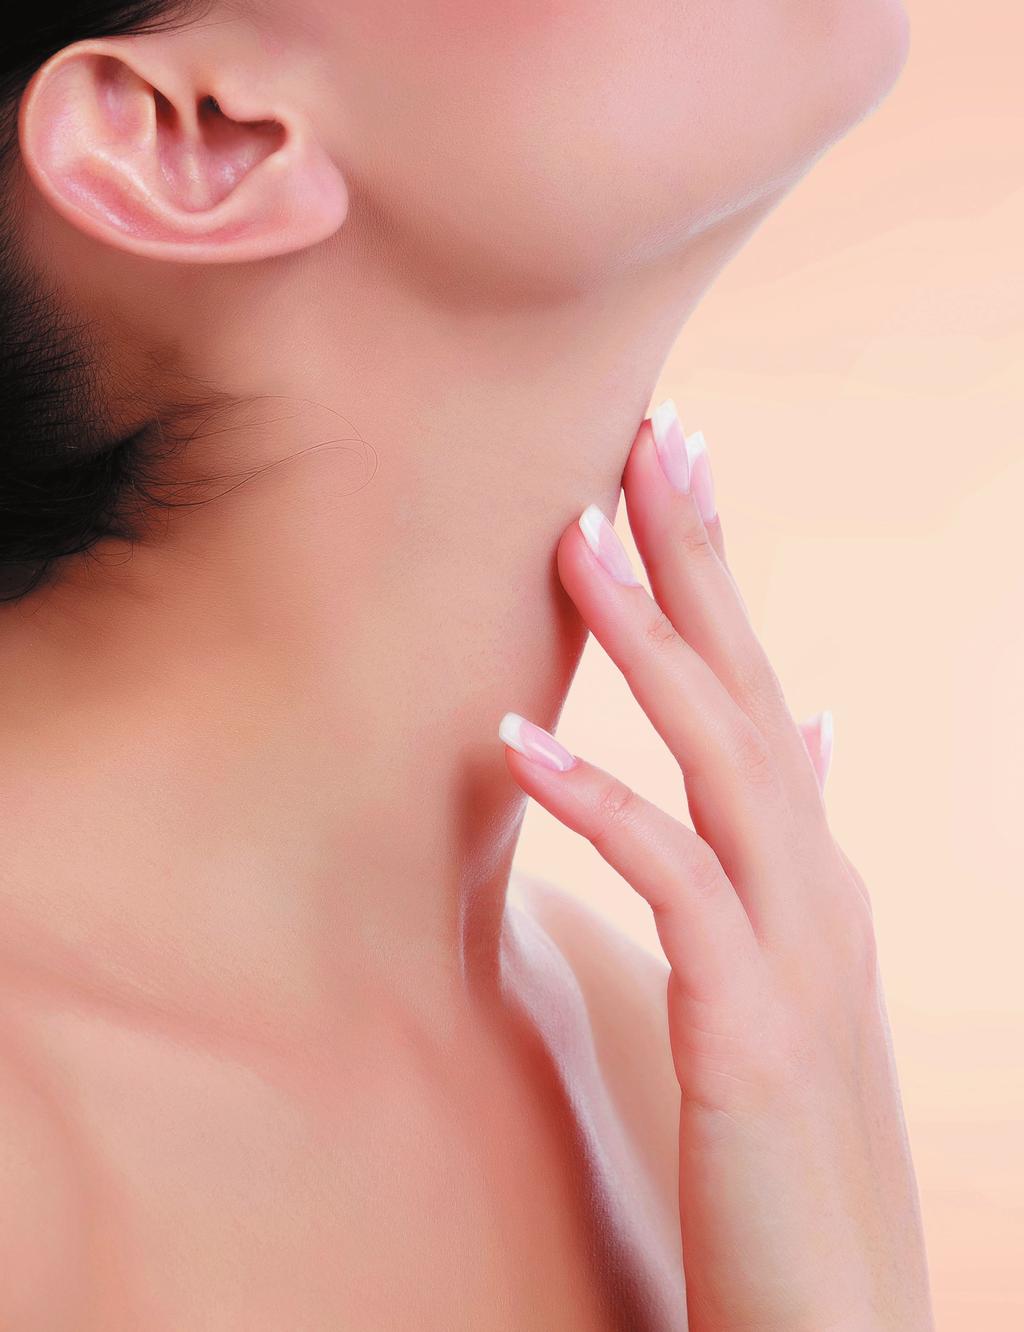 There have been studies made to quantify the amount of fat in the neck; it appears that the